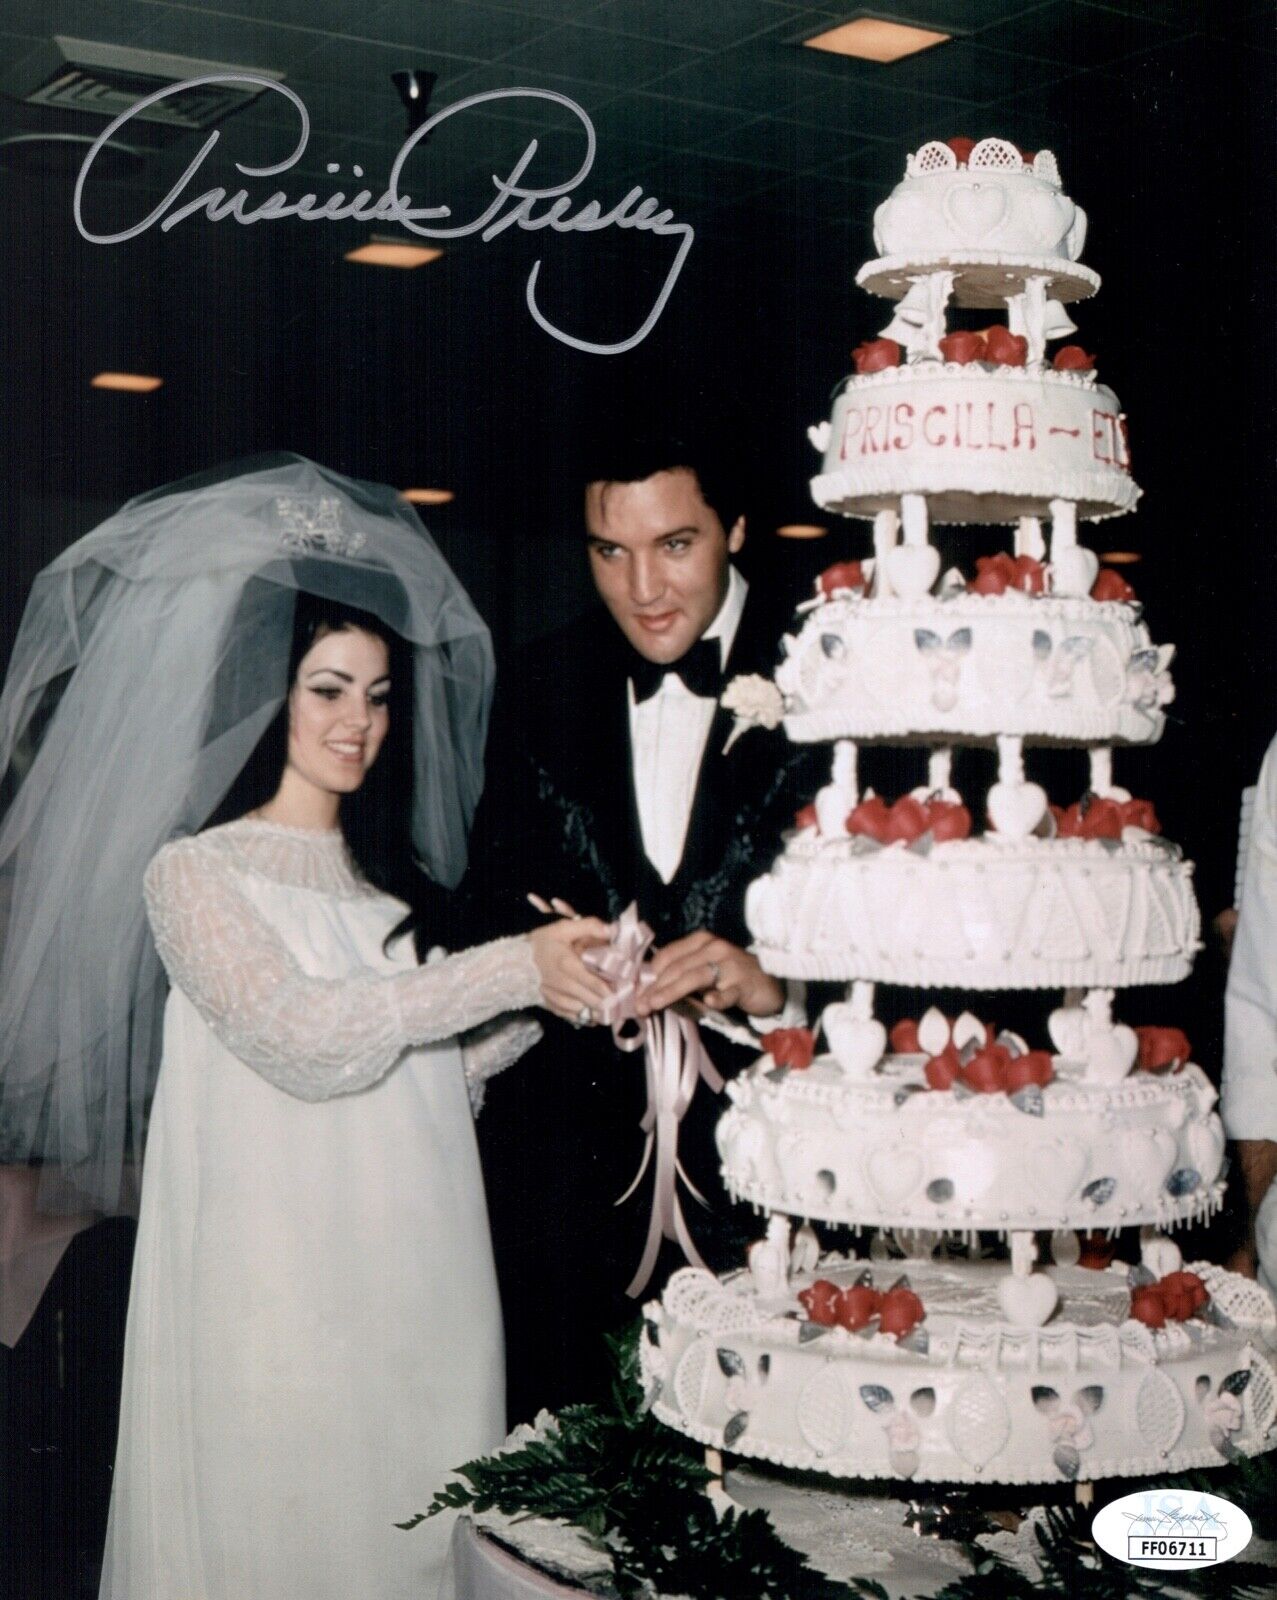 PRISCILLA PRESLEY Signed ELVIS 8x10 Photo Poster painting PRIVATE SIGNING Autograph JSA COA Cert